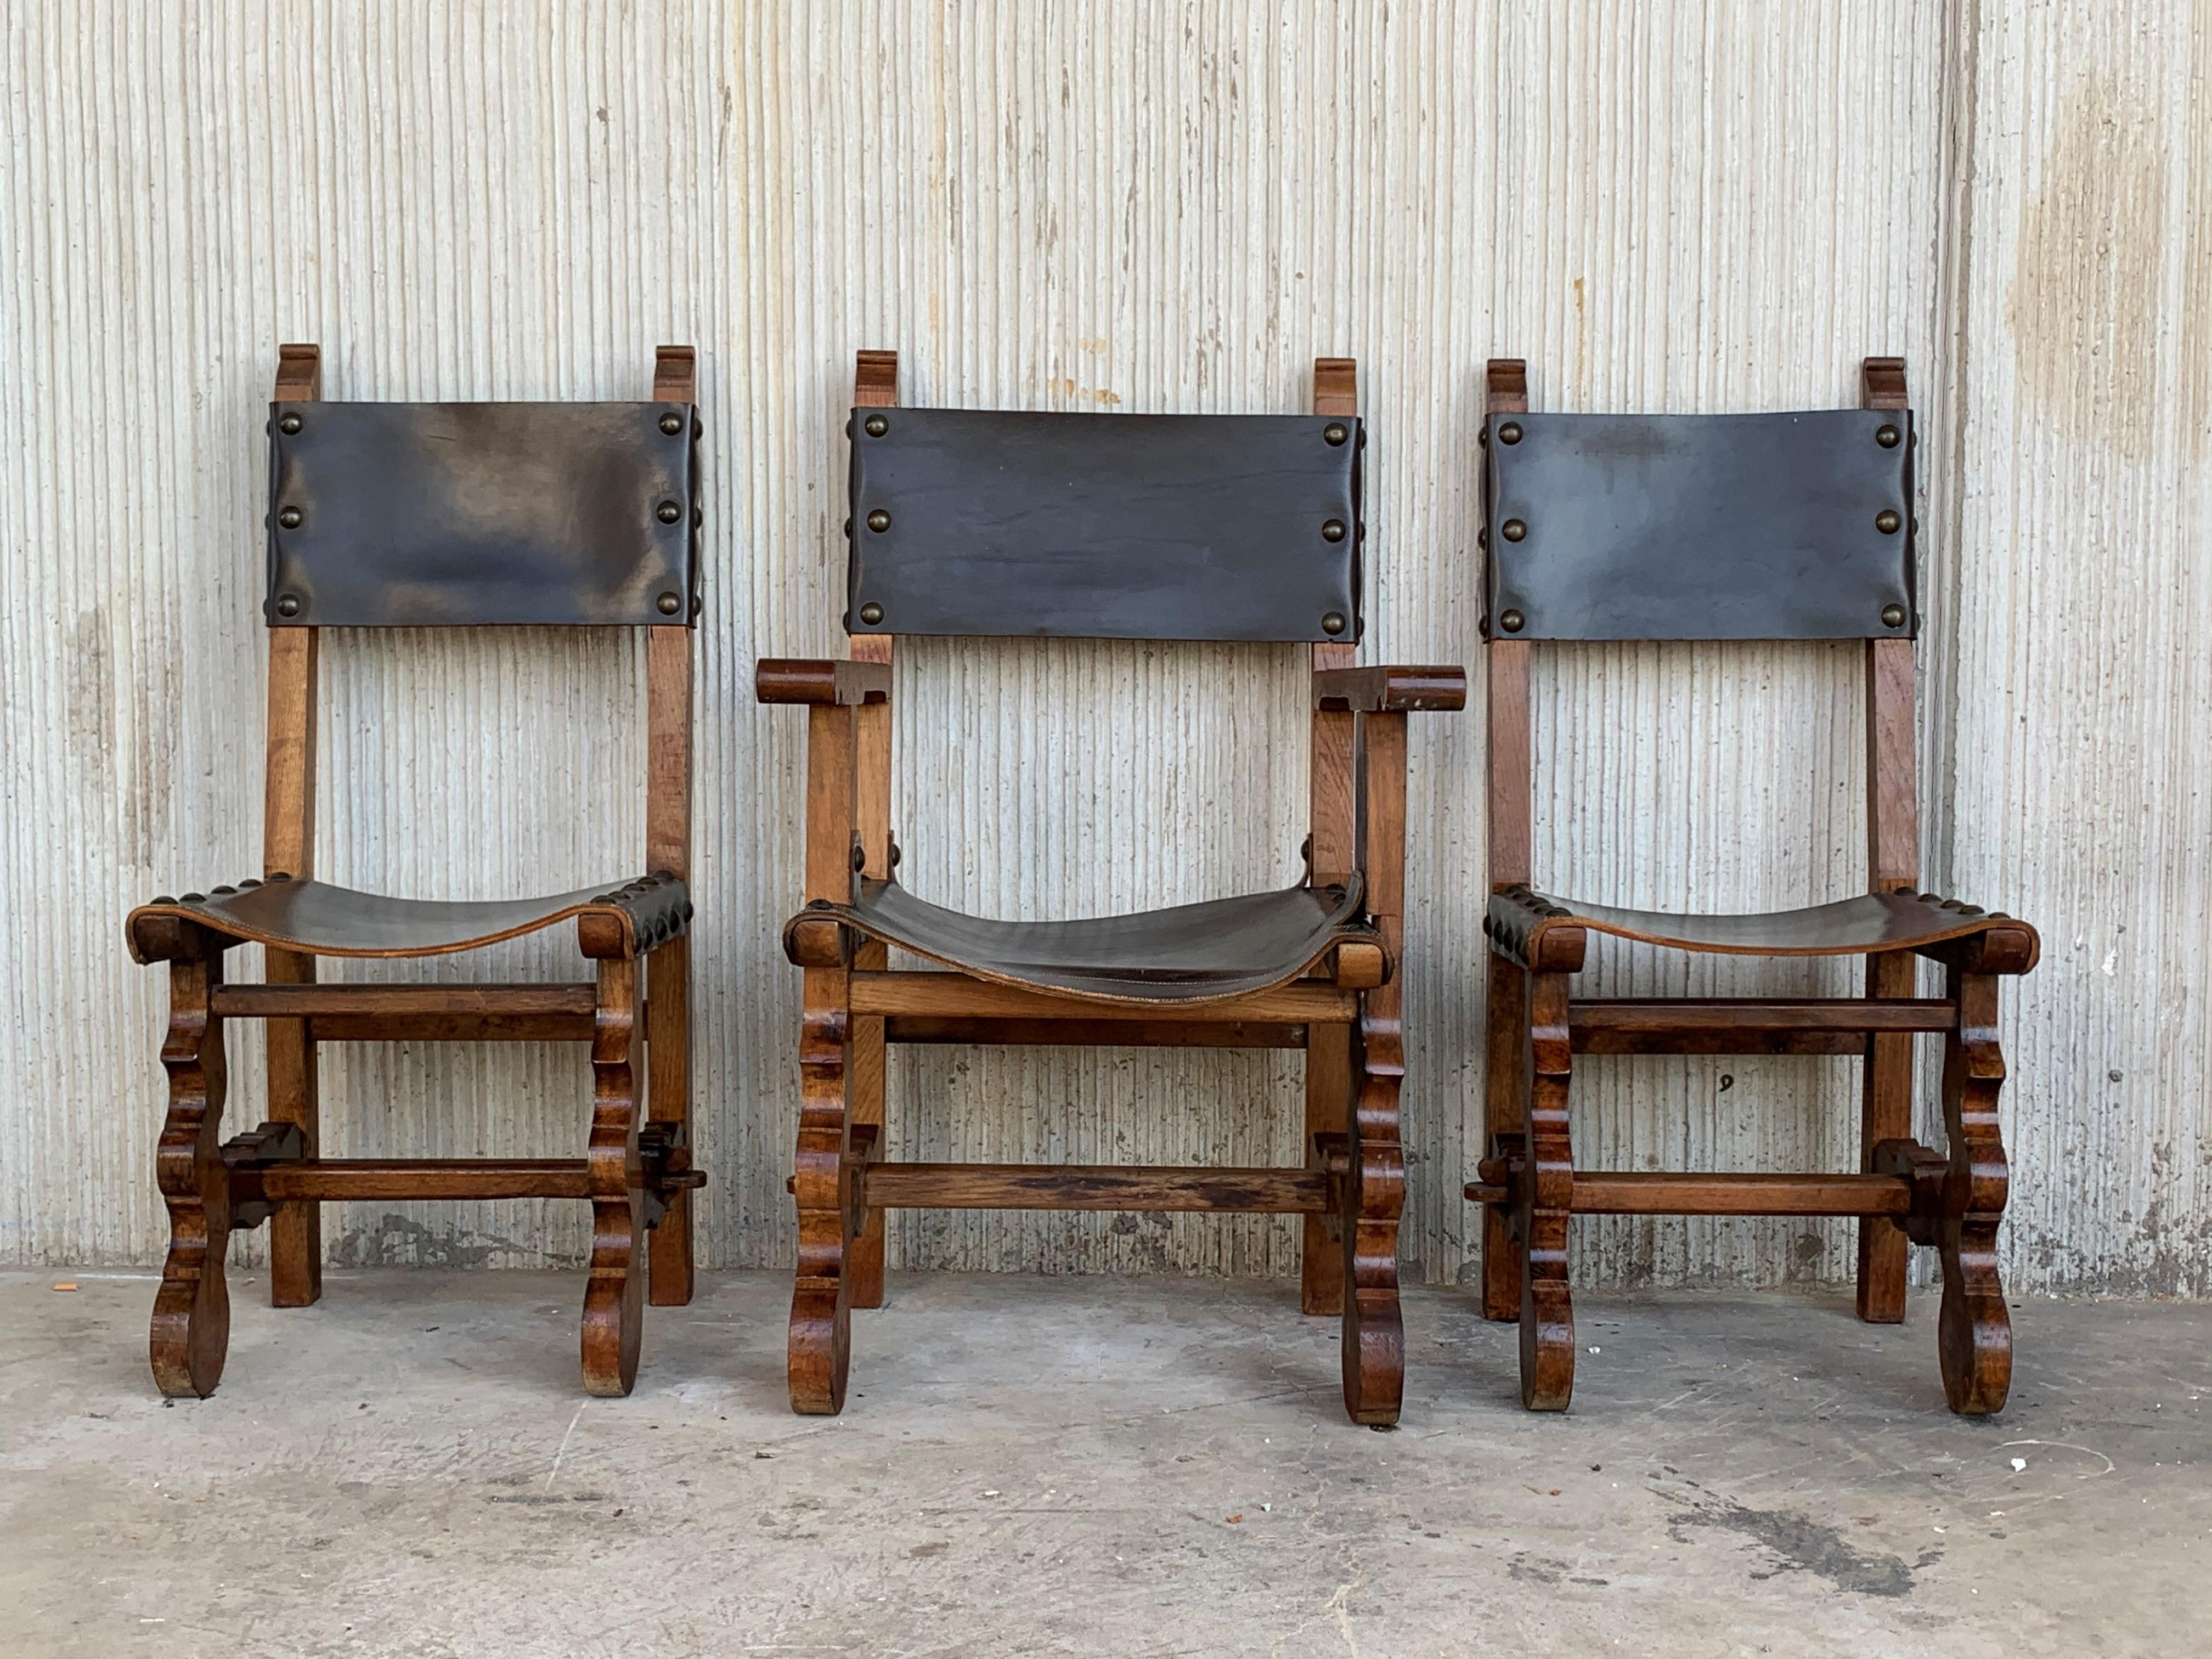 Pair of Spanish Colonial style chairs and armchair, having leather both seats and backs, and brass nailheads.


Armchair measurements:
Height 39.37in, seat height 18in, height to the arm 26.77in
Wide 17.71in
Deep 15.75in

Chair